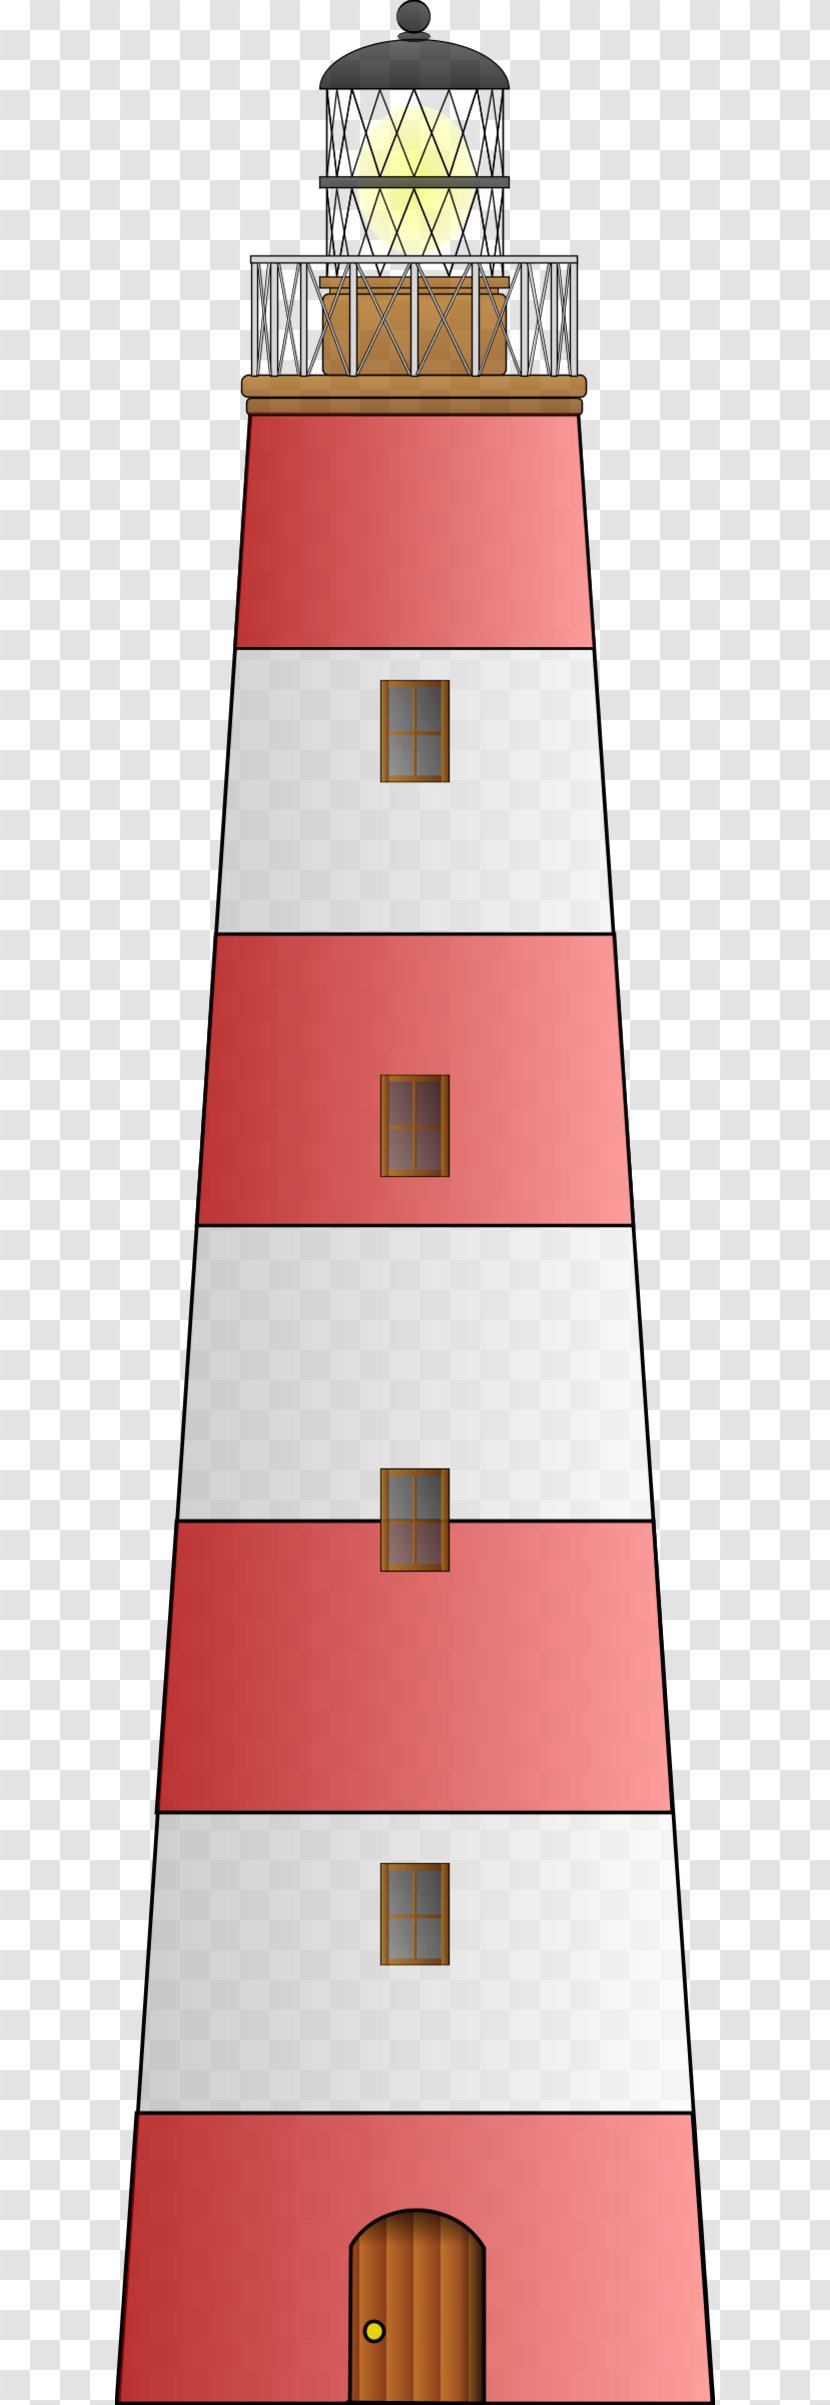 Lighthouse Clip Art - Openoffice Draw - Building Cliparts Transparent PNG